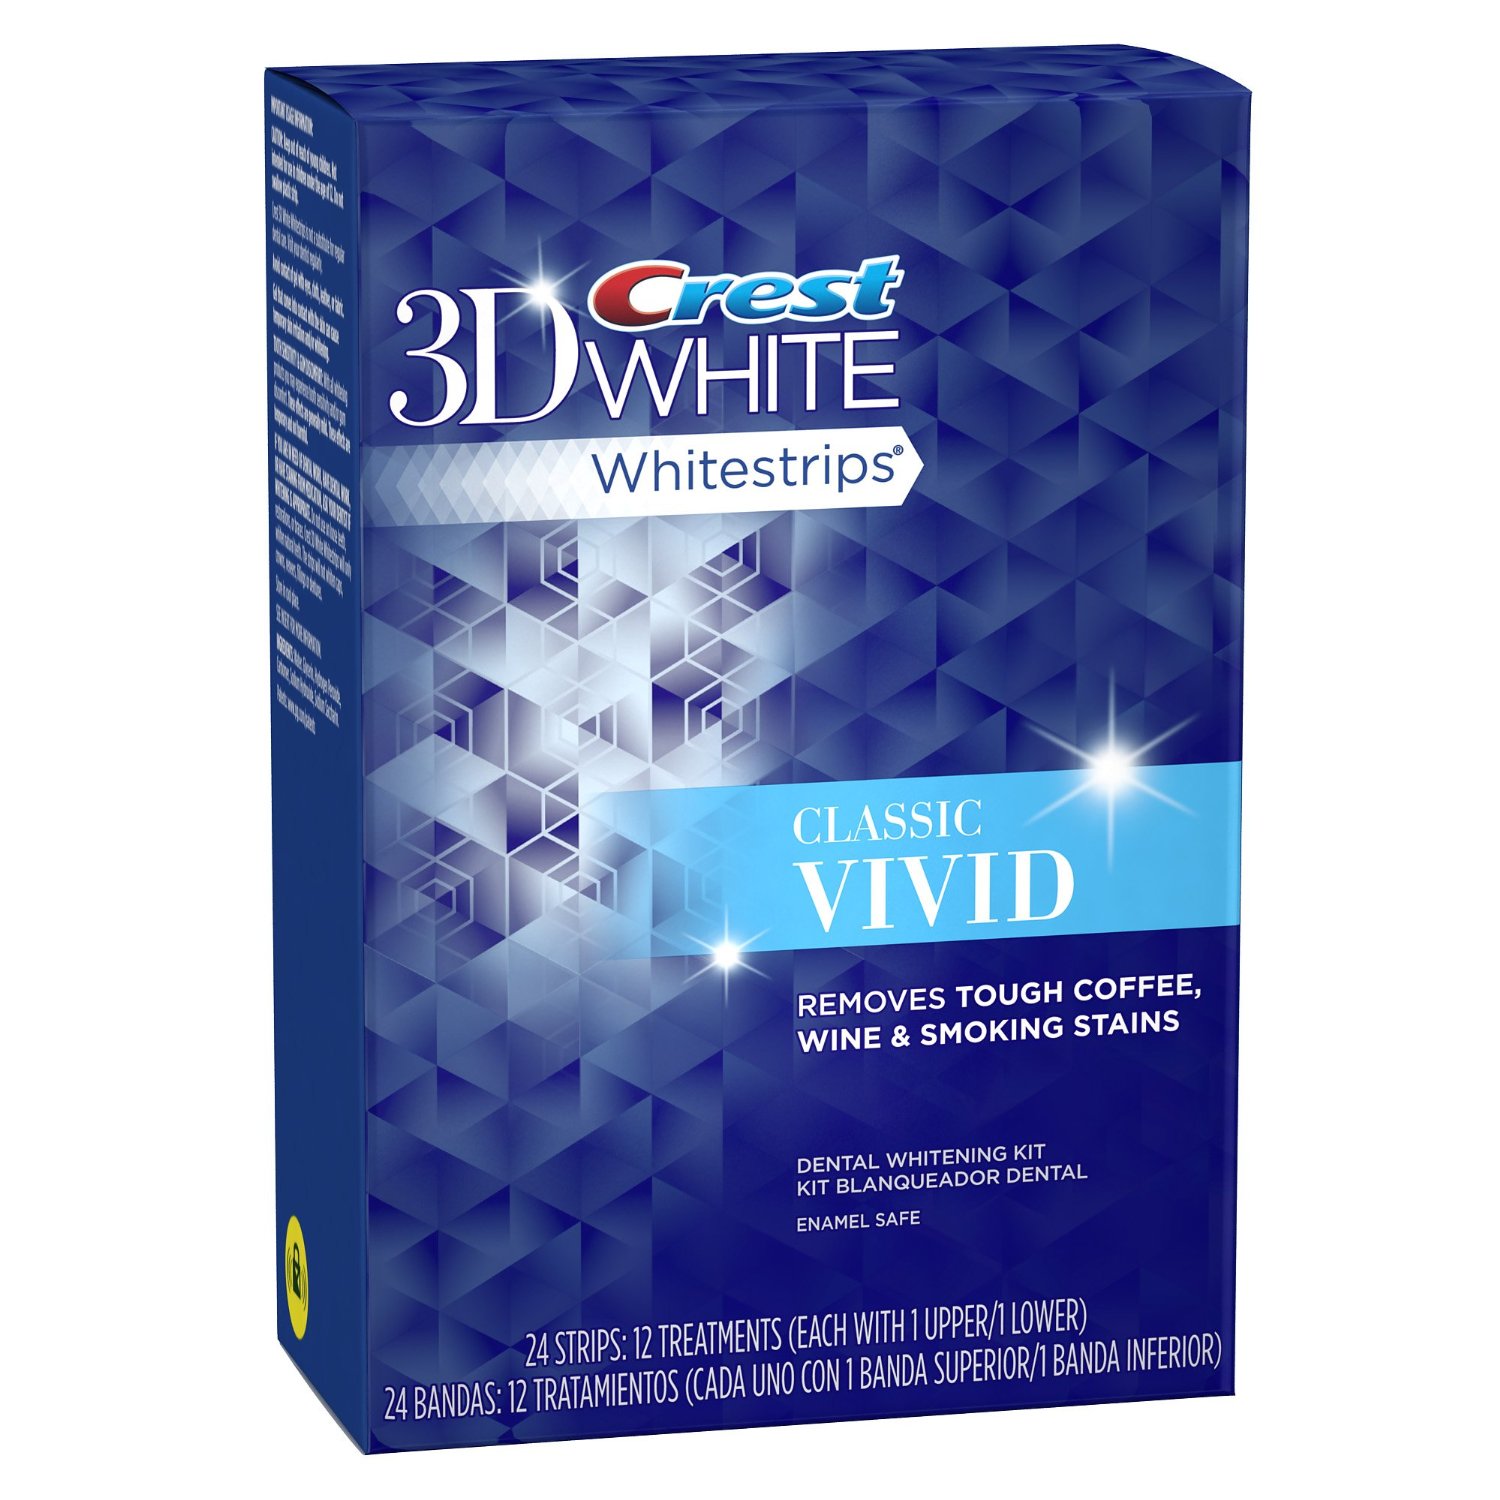 giveaway-guy-see-results-in-12-days-with-crest-3d-white-whitestrips